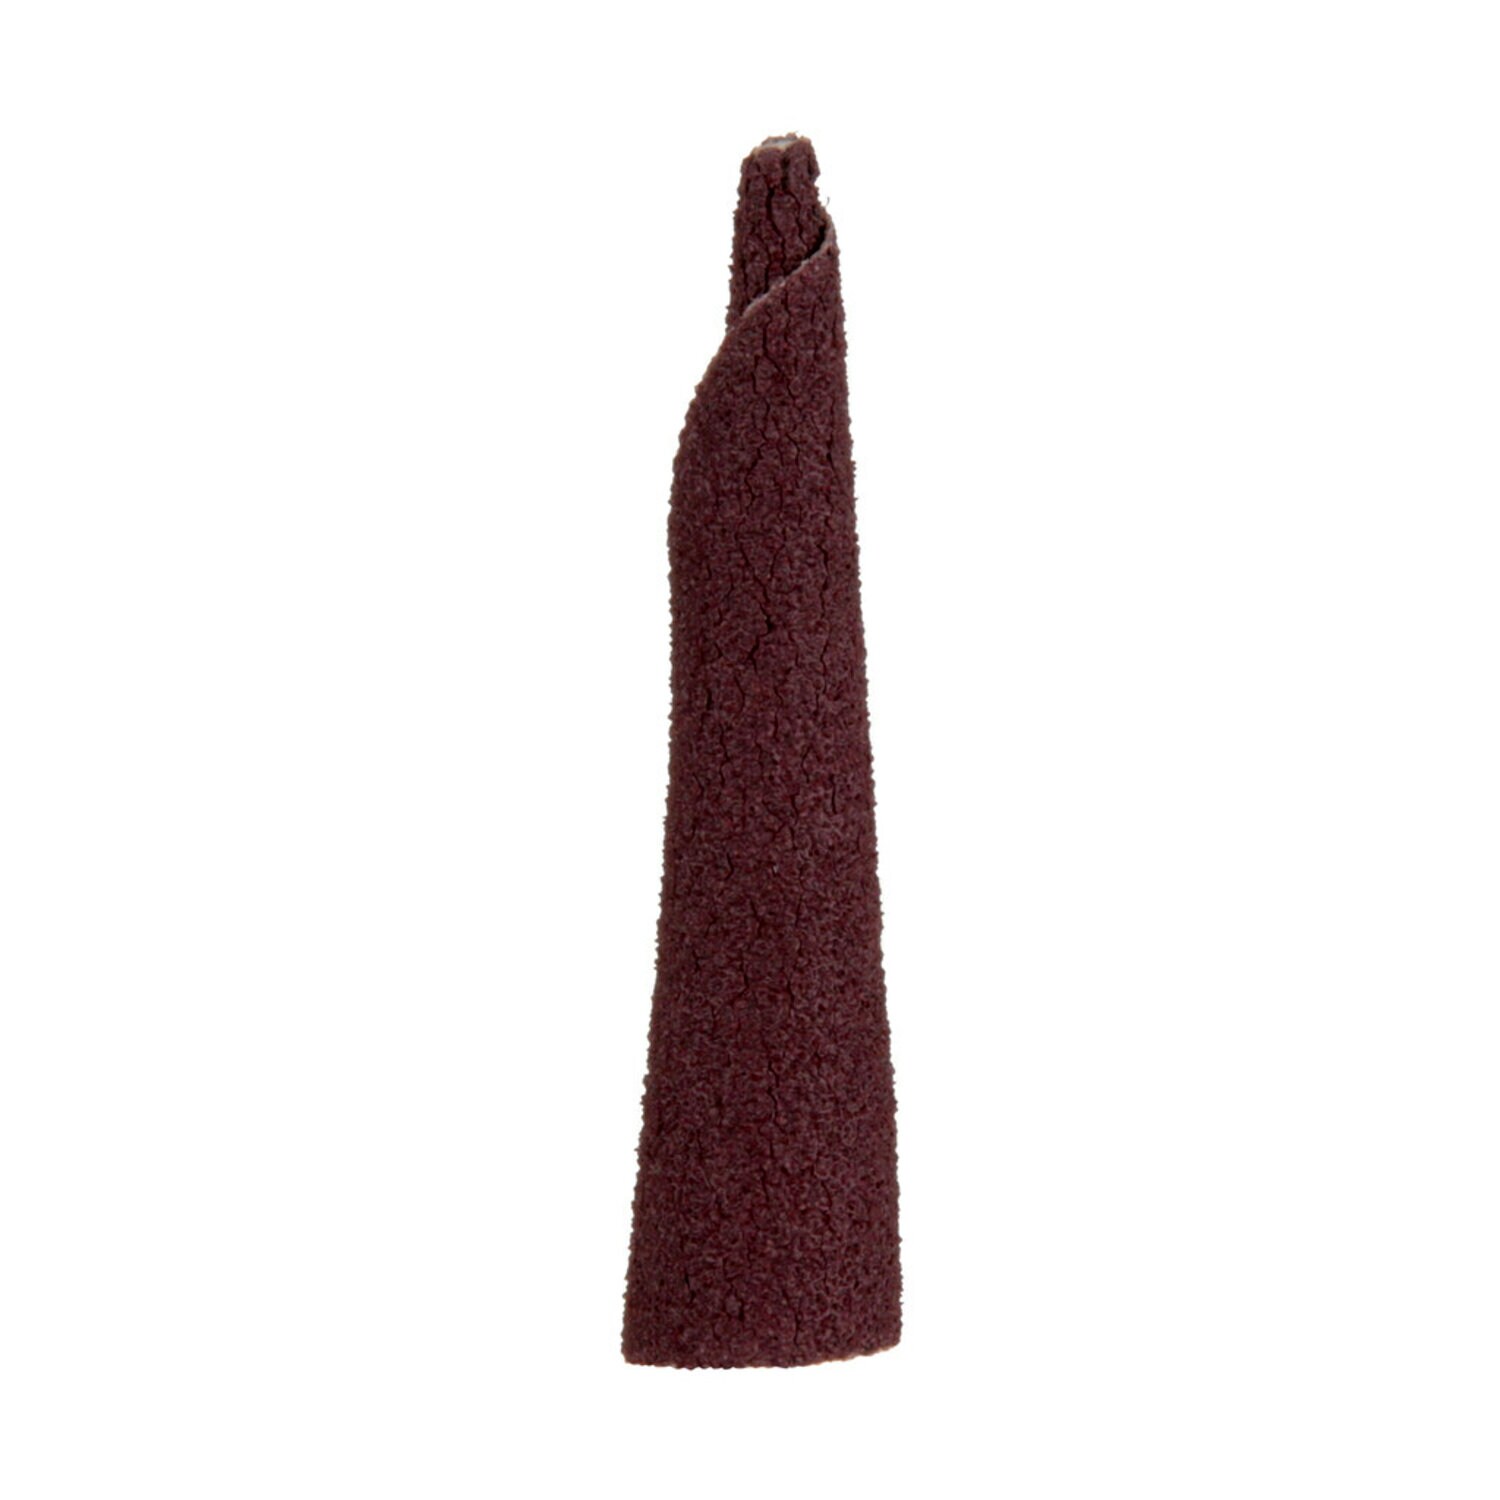 7100119537 - Standard Abrasives Aluminum Oxide Tapered Cone Point, 712768, C-30 80, 100 ea/Case